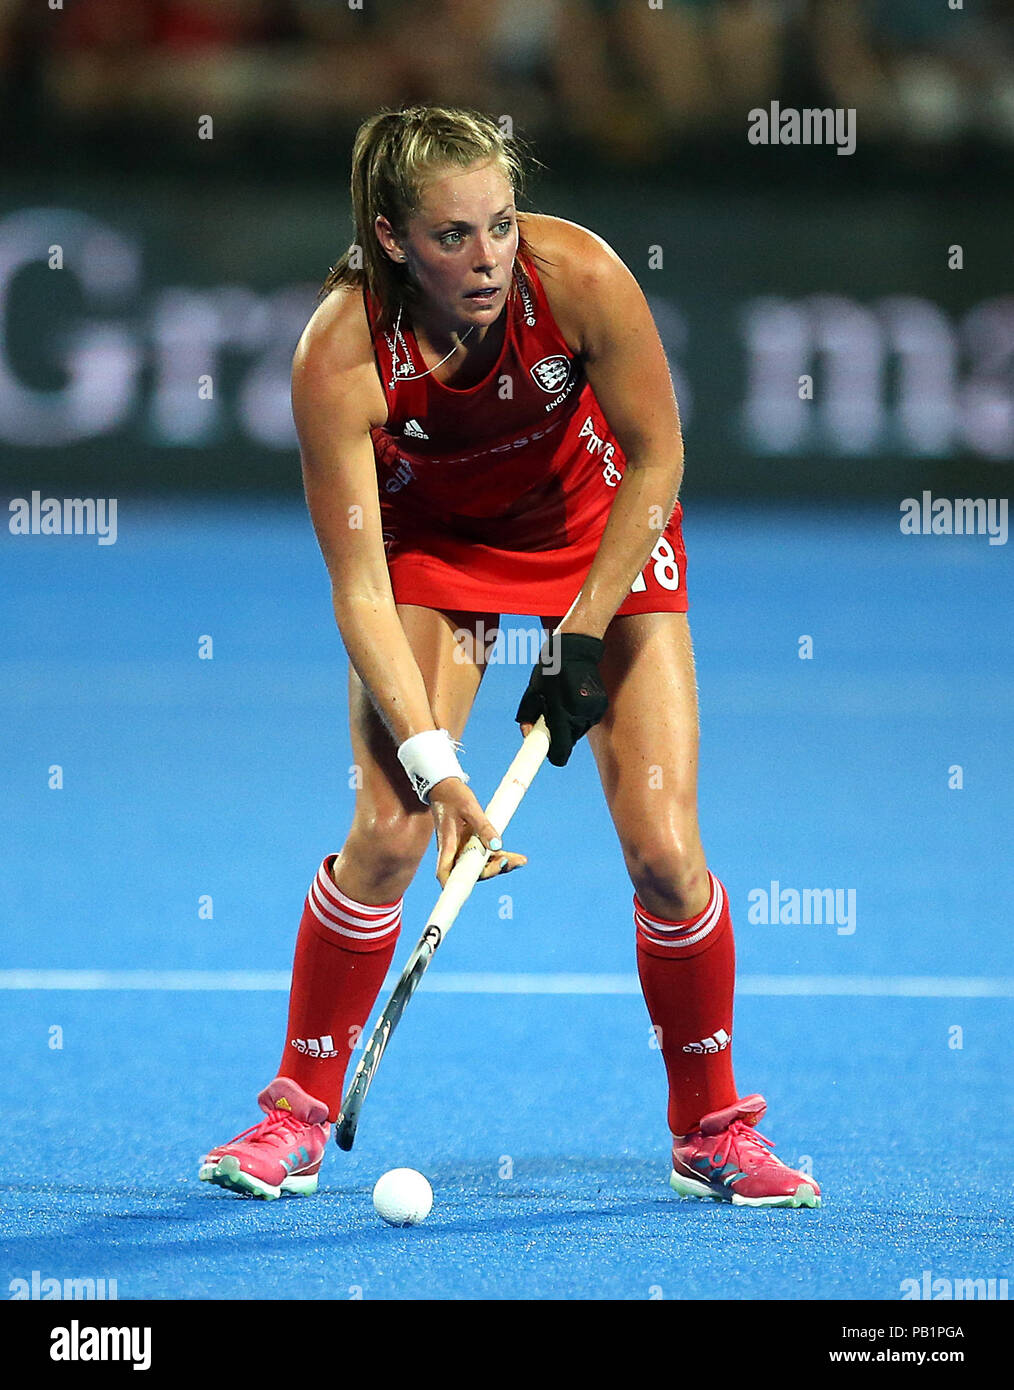 England's Giselle Ansley in action during the national Vitality Women's Hockey World Cup match at The Lee Valley Hockey and Tennis Centre, London. PRESS ASSOCIATION Photo, Picture date: Wednesday July 25, 2018. Photo credit should read: Steven Paston/PA Wire. Stock Photo